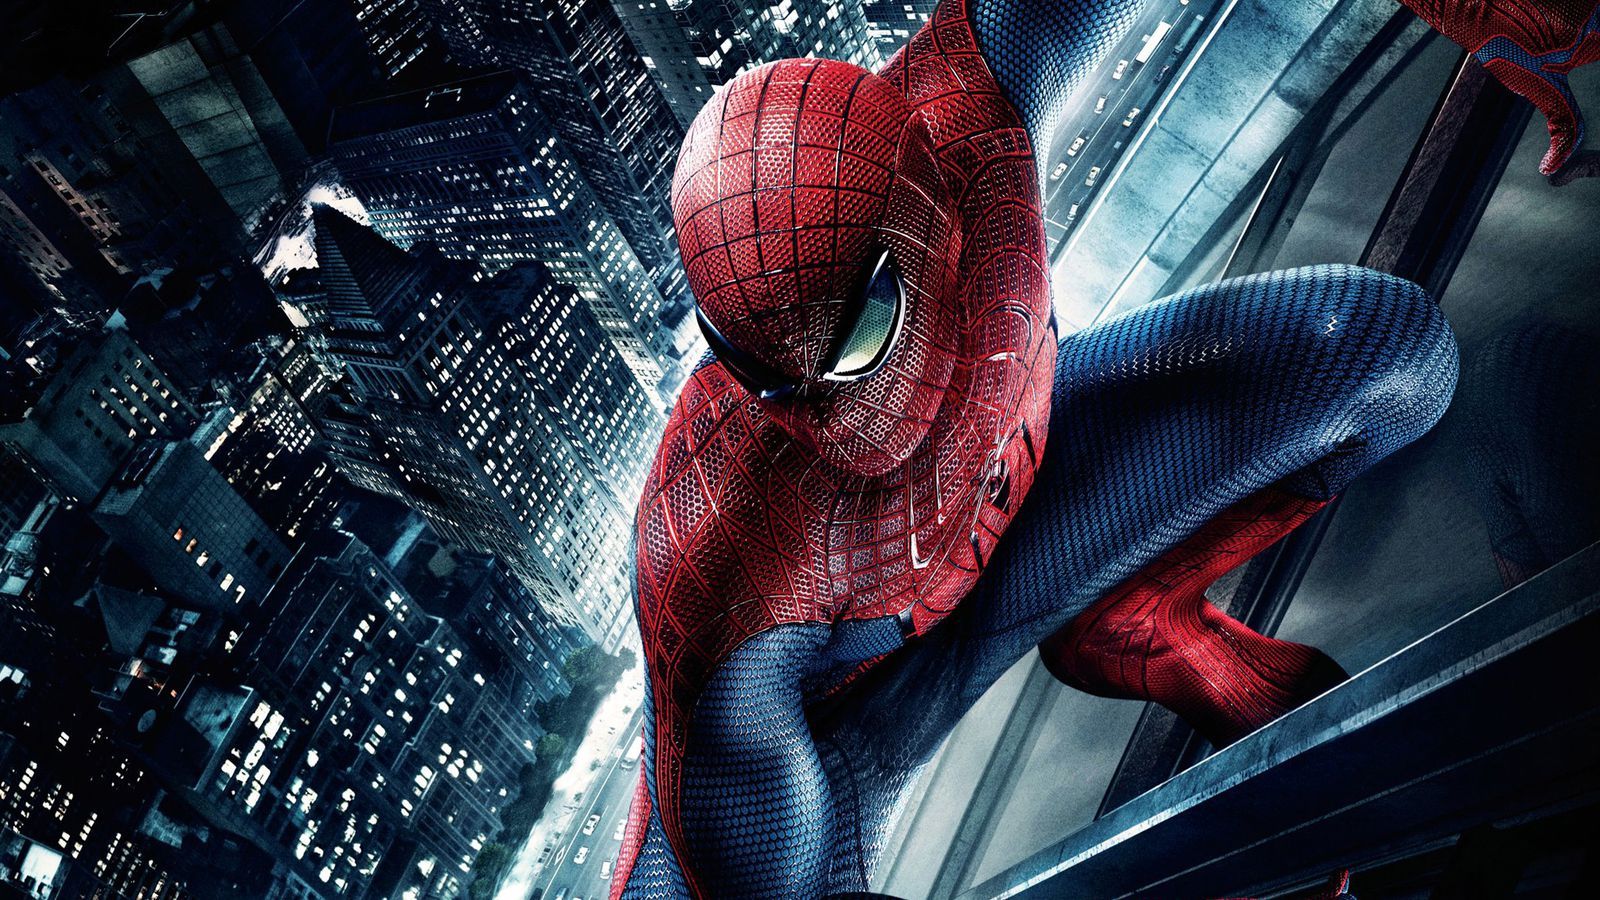 Spider Man Is Now A Part Of Marvel's Cinematic Universe